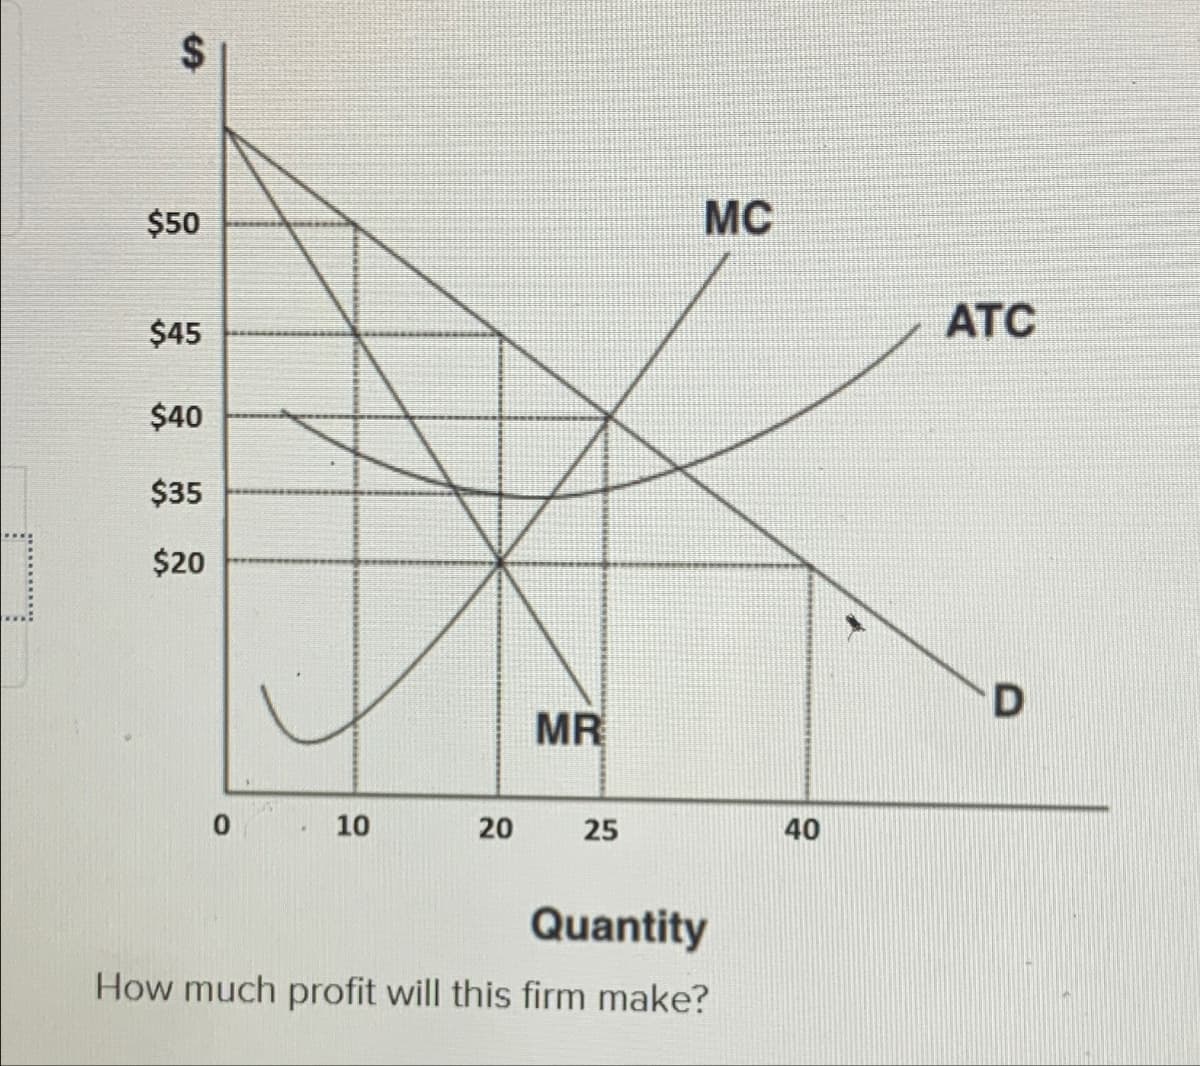 $
$50
MC
$45
$40
$35
$20
0
MR
10
10
20
25
40
40
Quantity
How much profit will this firm make?
ATC
D